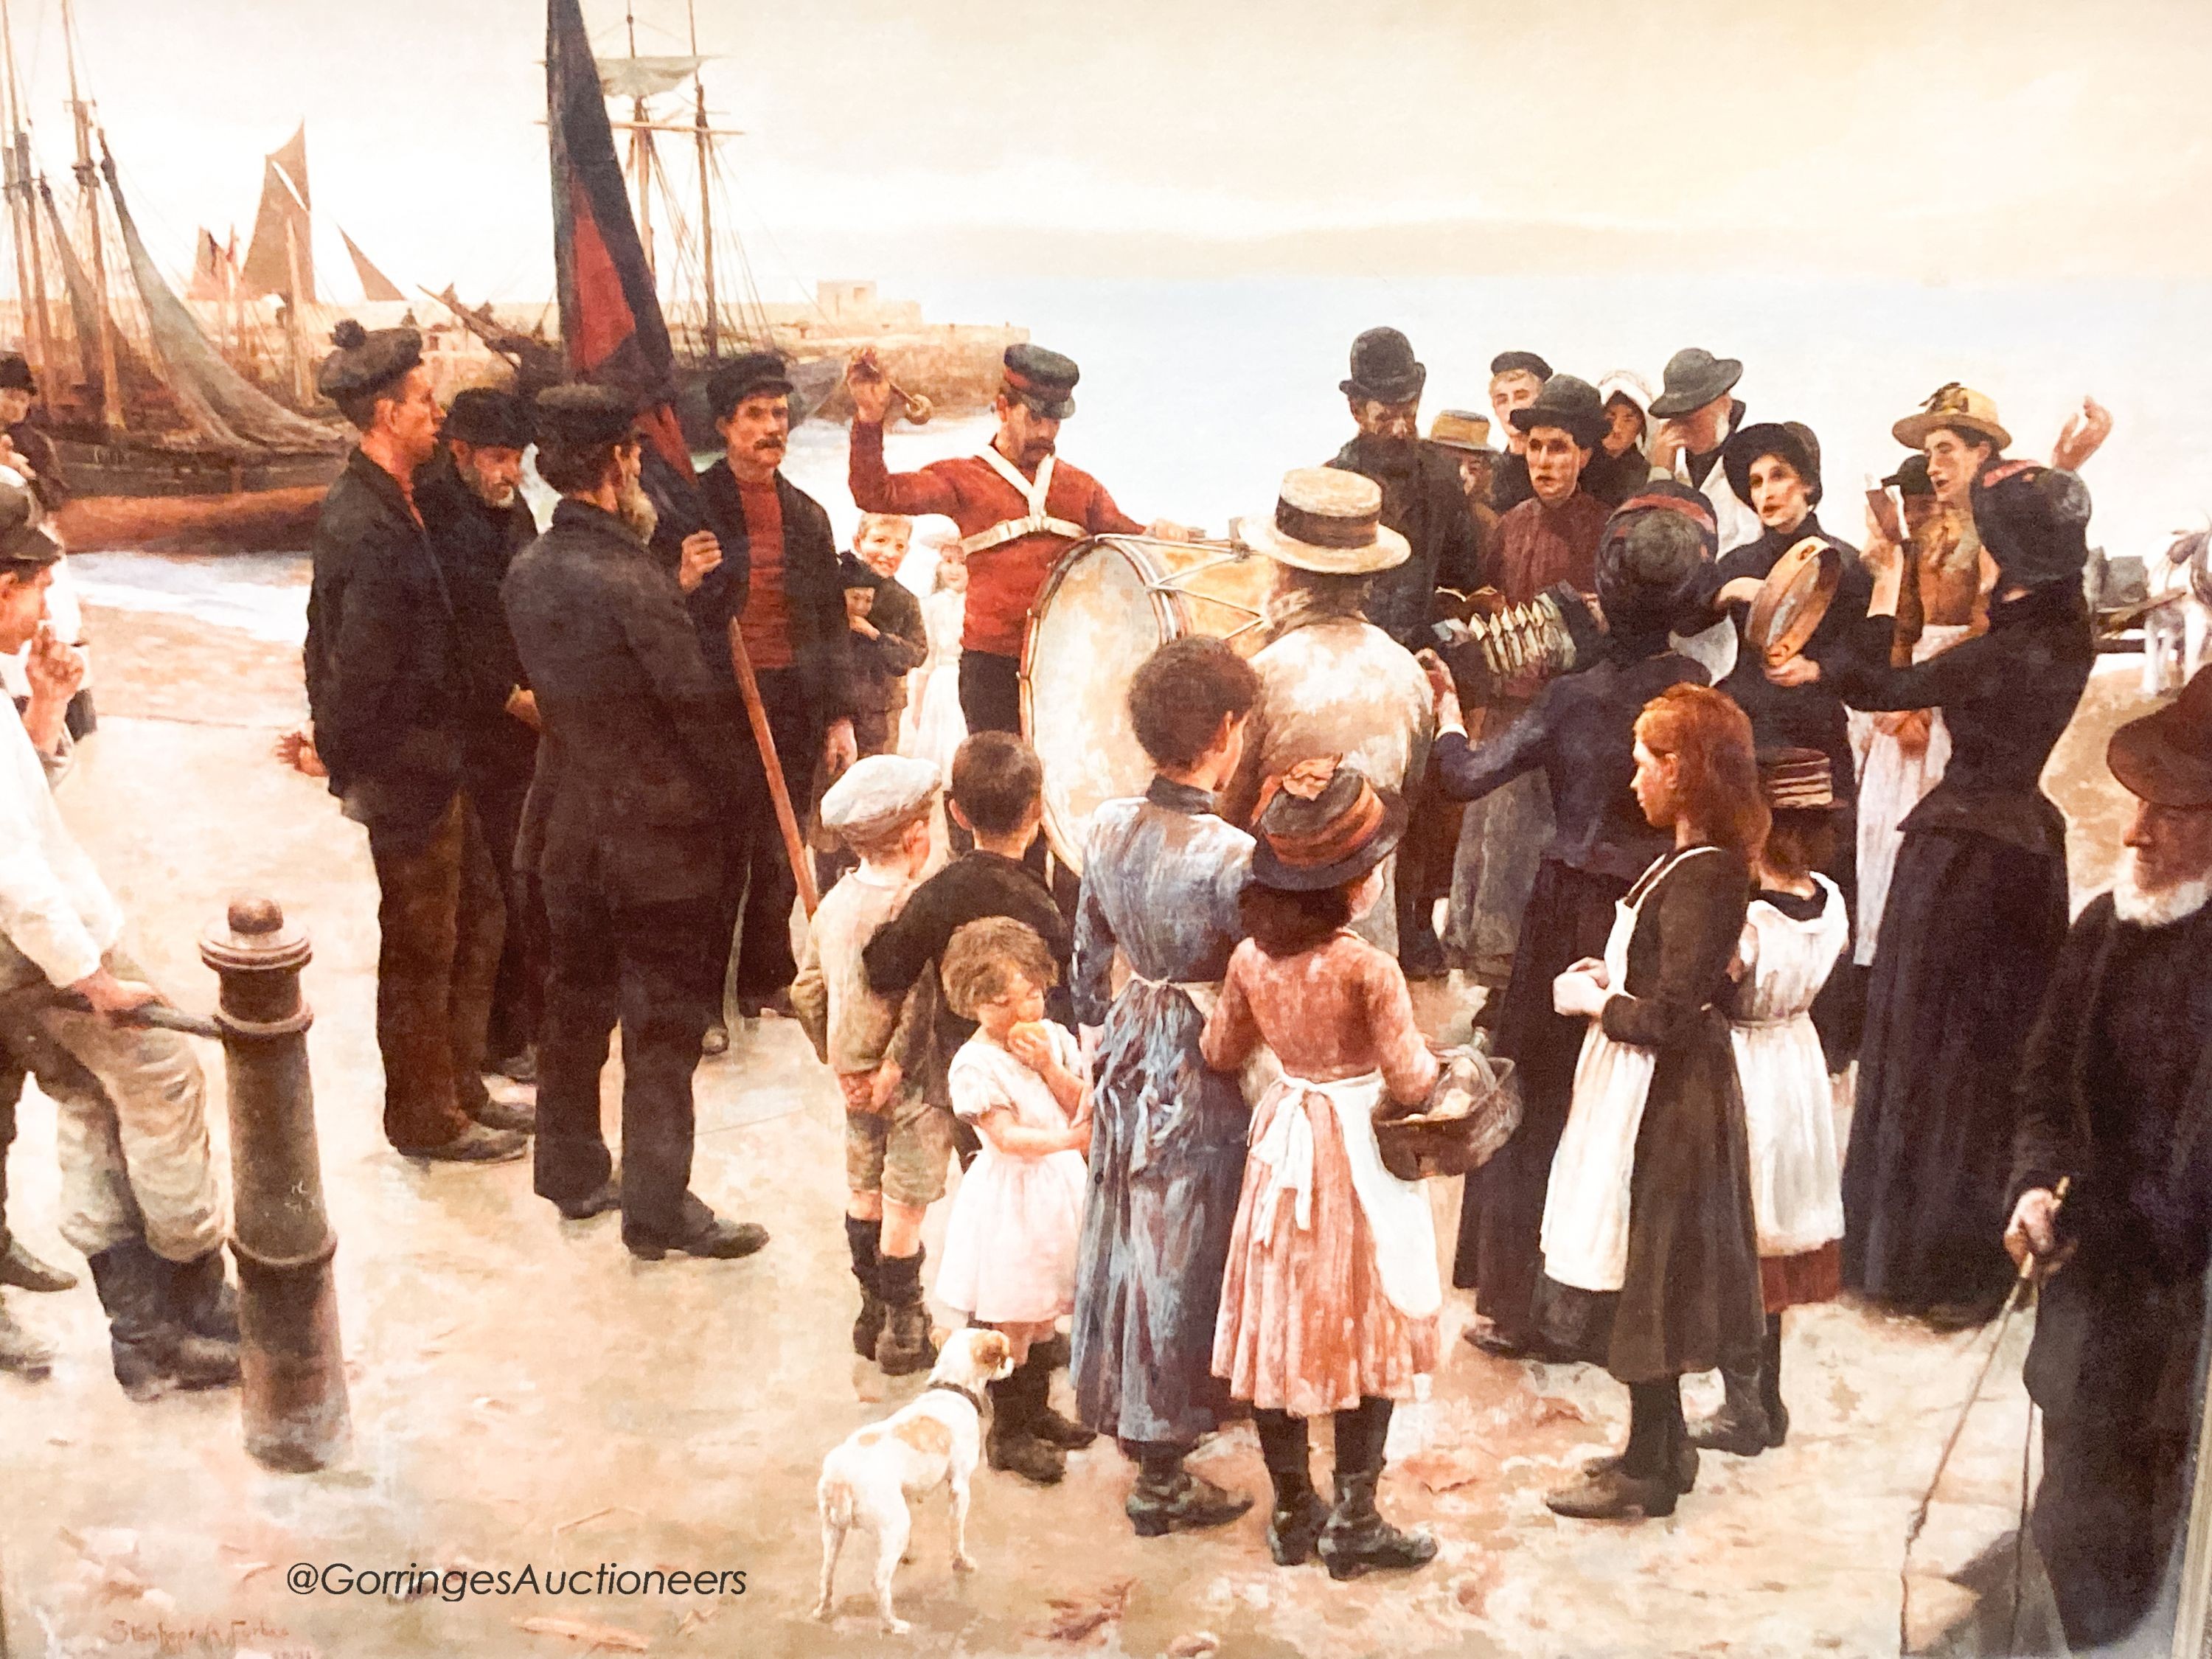 After Stanhope Alexander Forbes (1857-1947) - a large coloured print - “Quayside gathering’’, width excluding frame 157cm, height 120cm